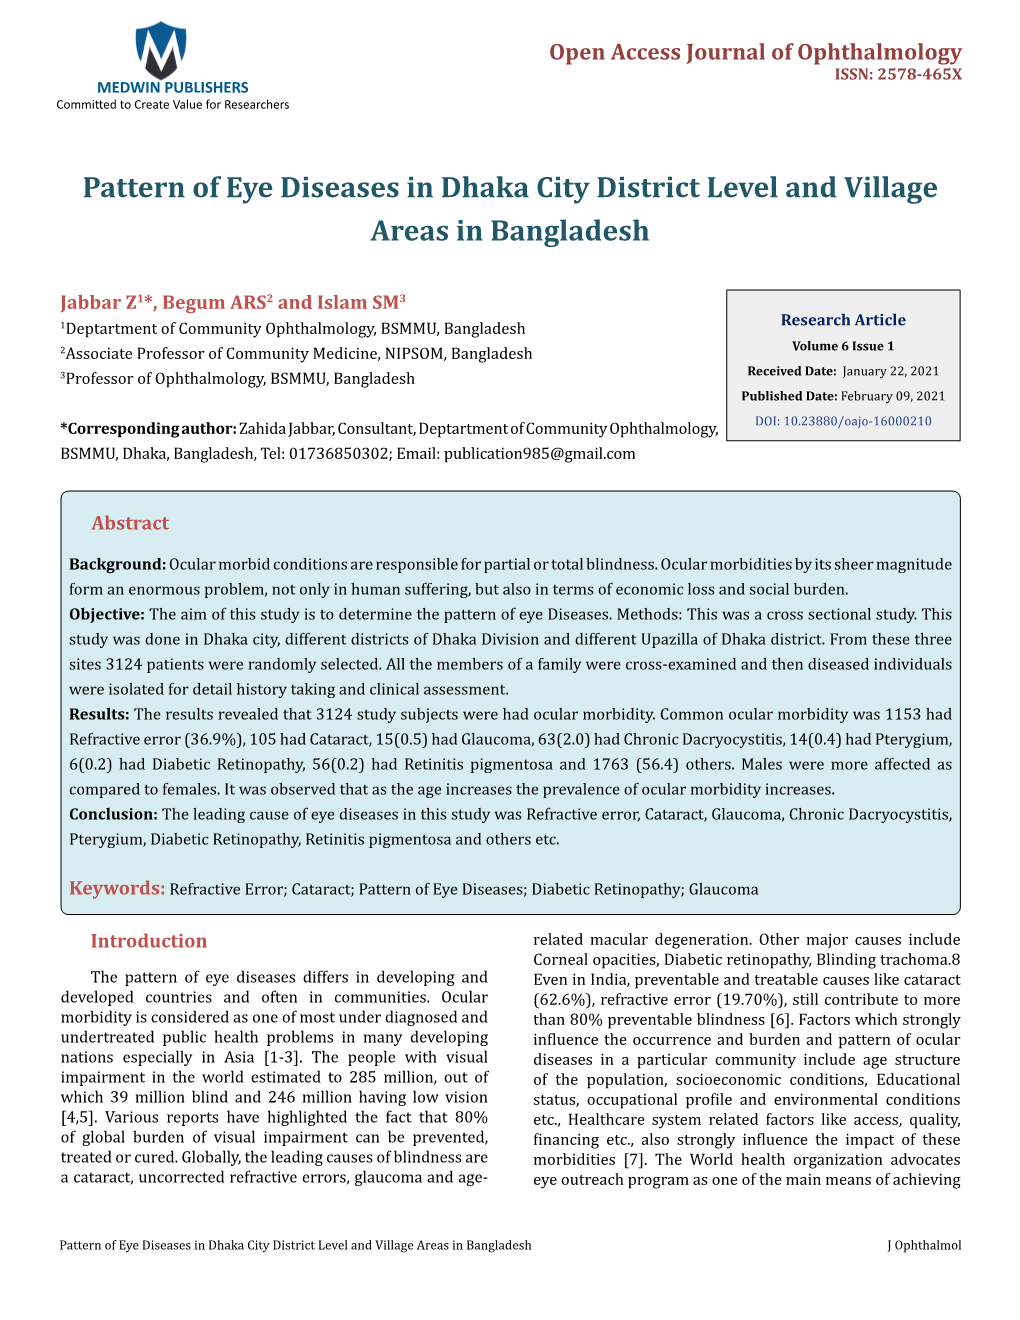 Pattern of Eye Diseases in Dhaka City District Level and Village Areas in Bangladesh